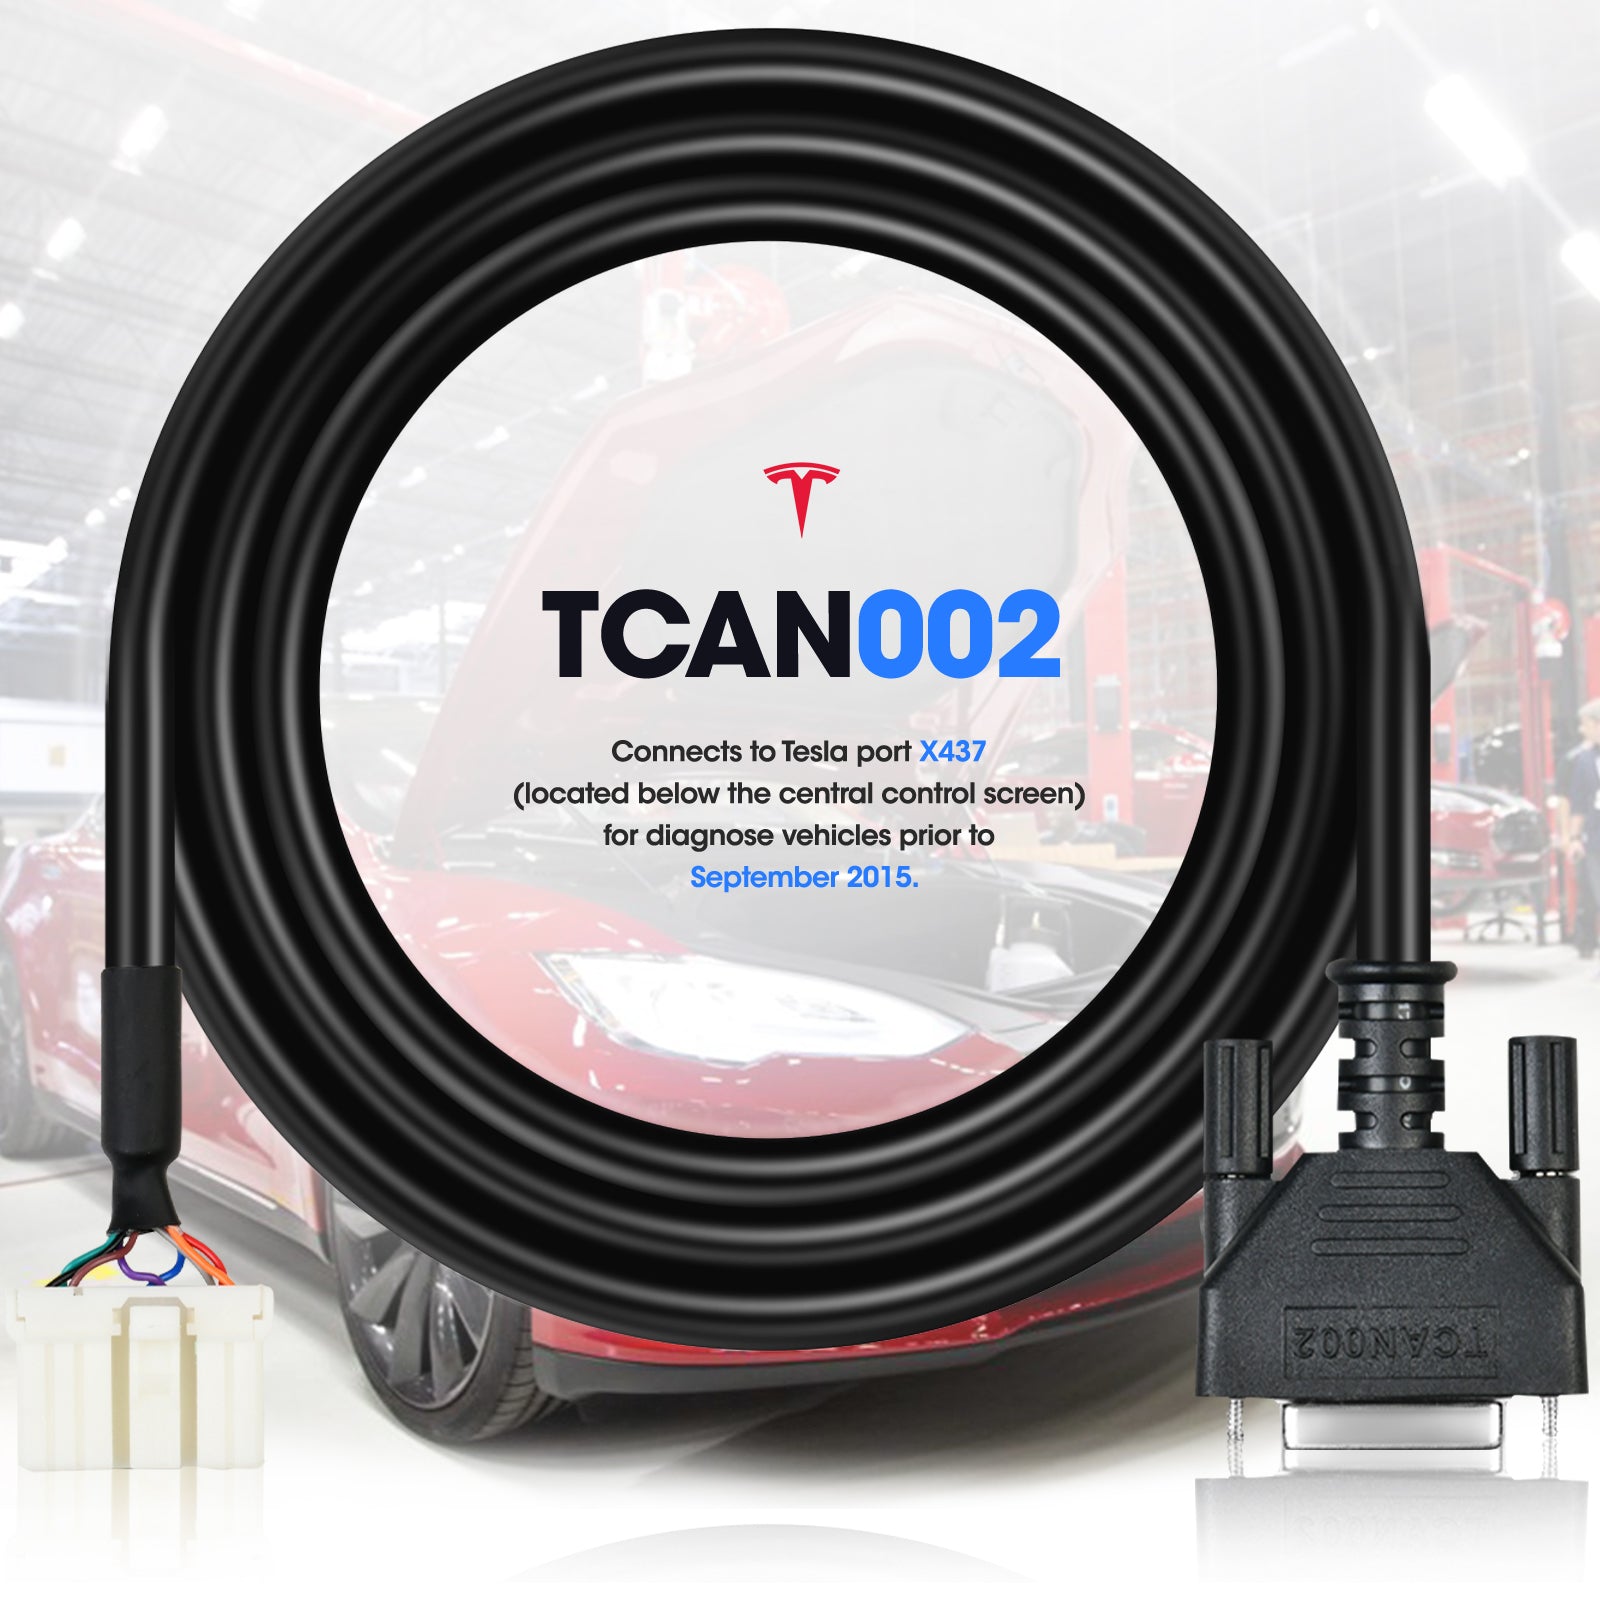 TCAN002: Connect with Tesla Port X437